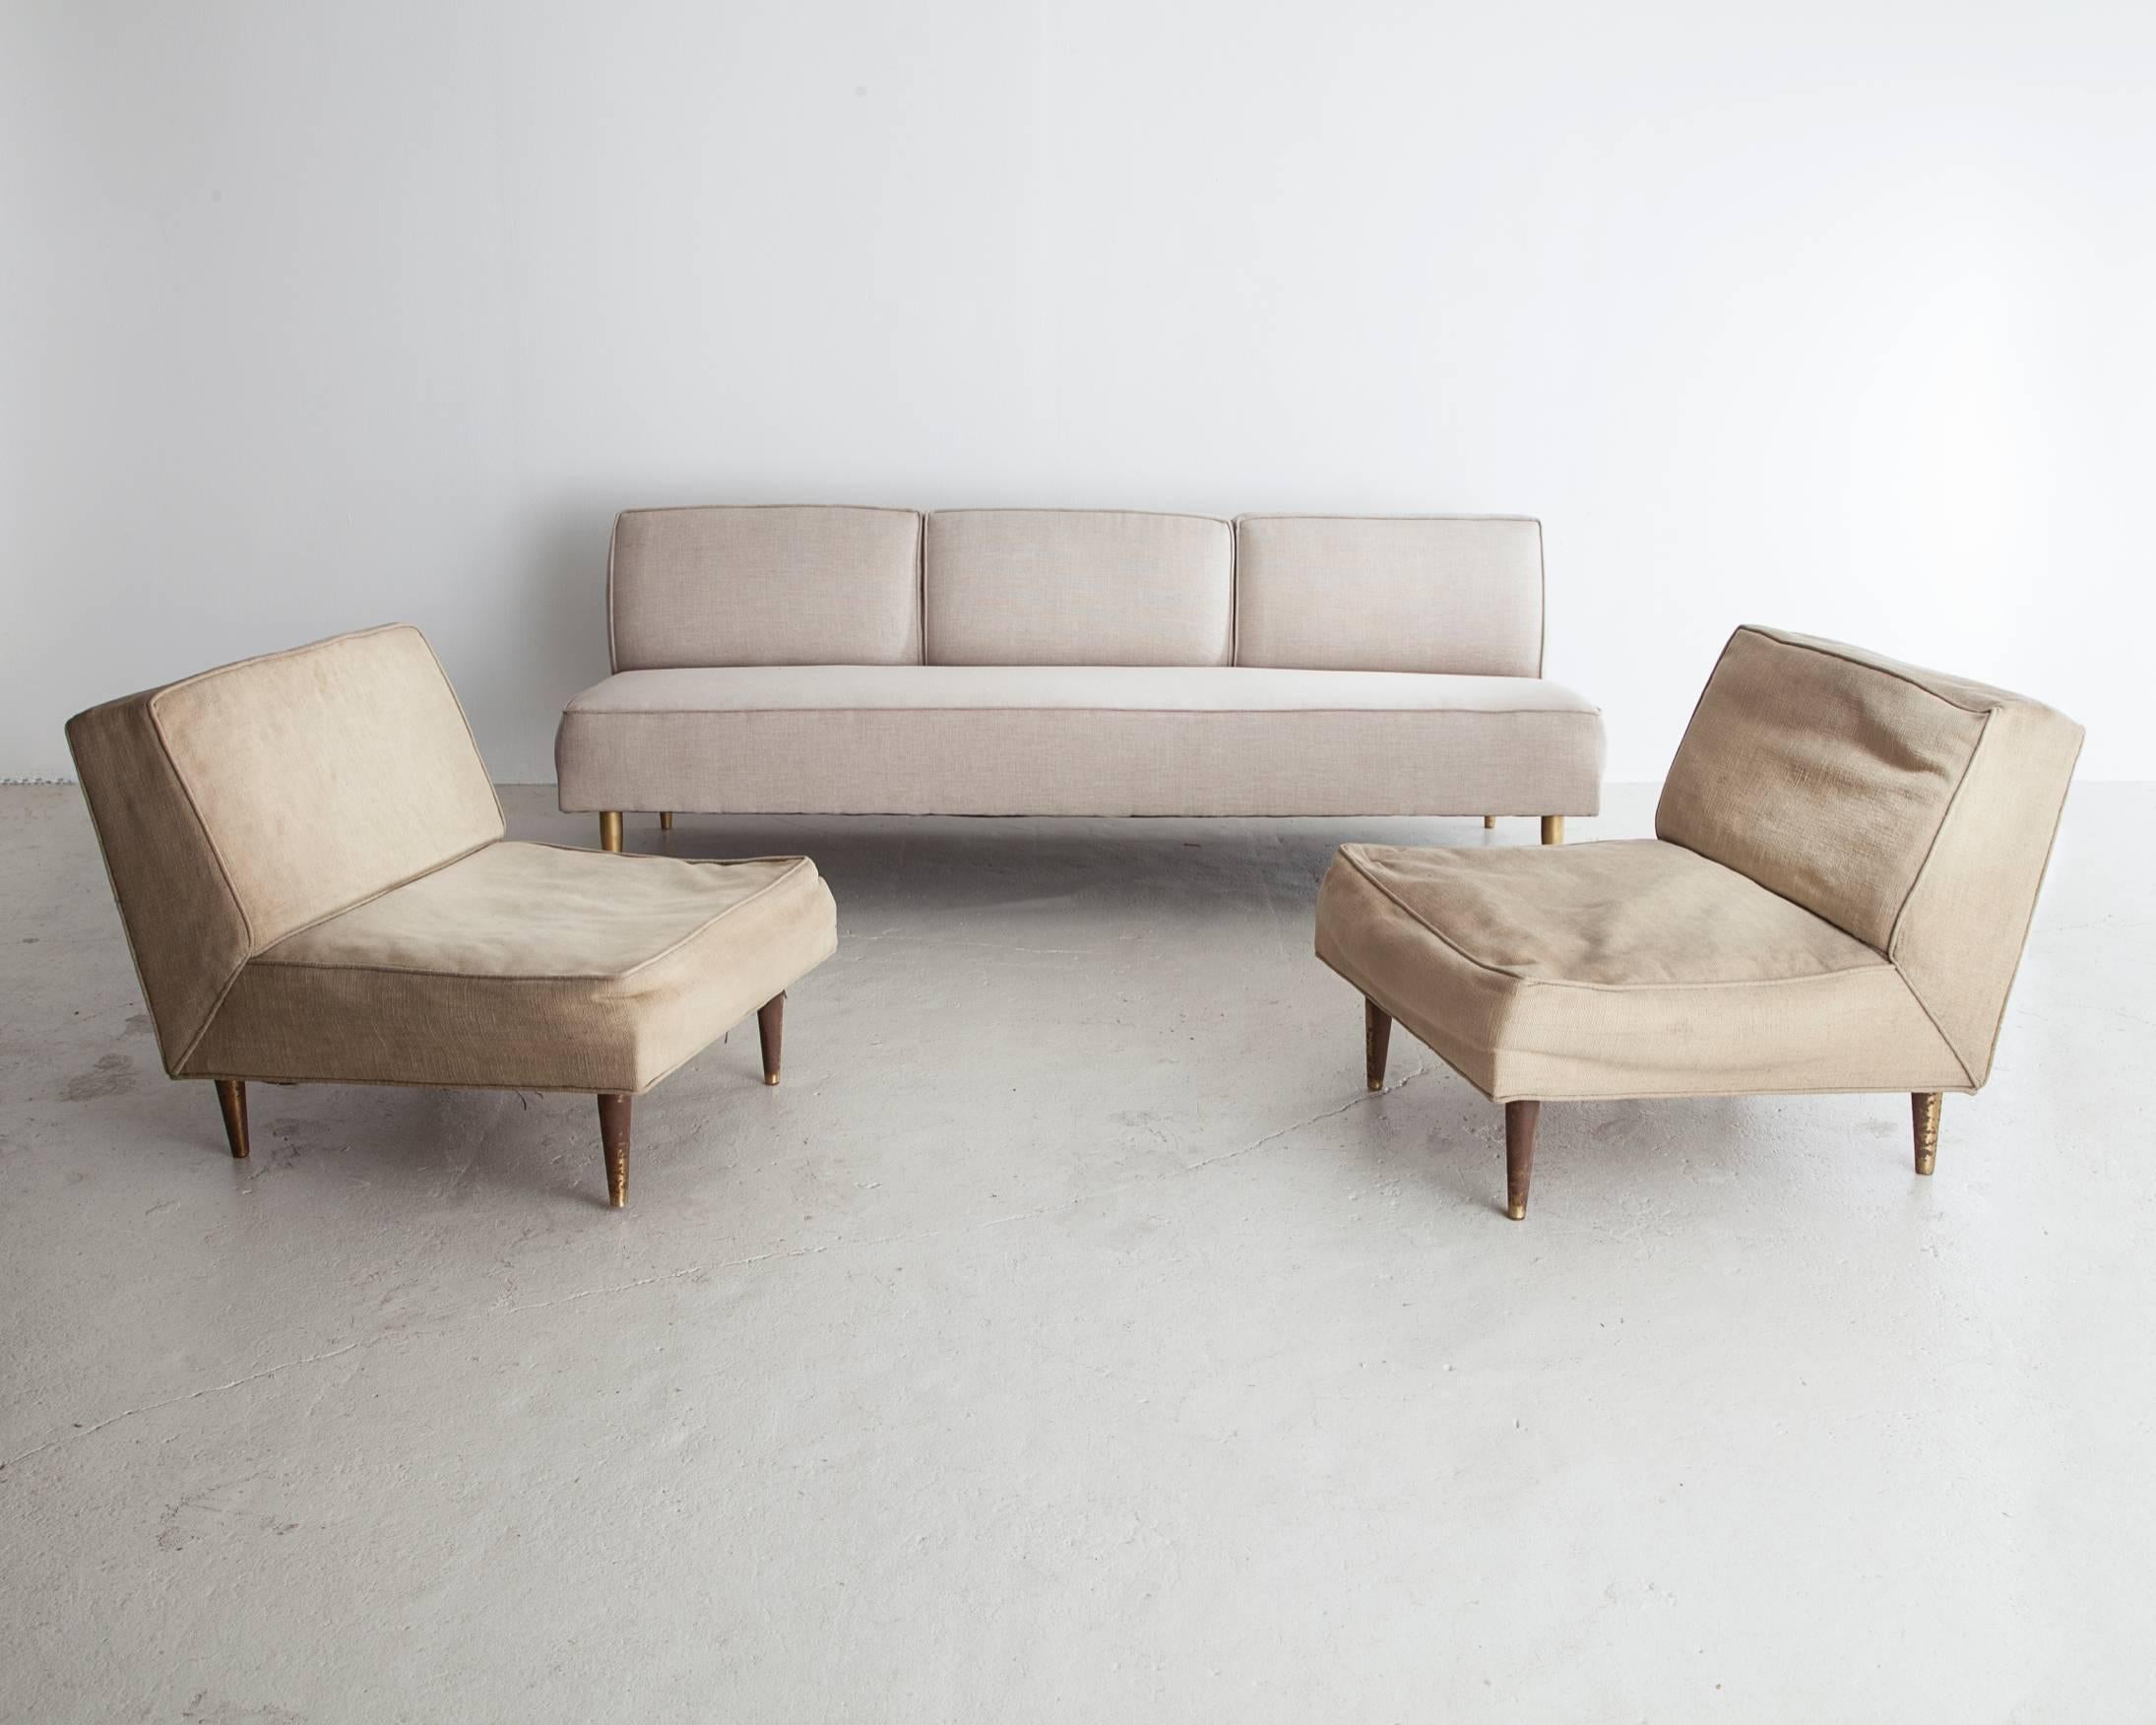 Sofa by Greta Magnusson Grossman, USA, circa 1952 In Excellent Condition For Sale In New York, NY